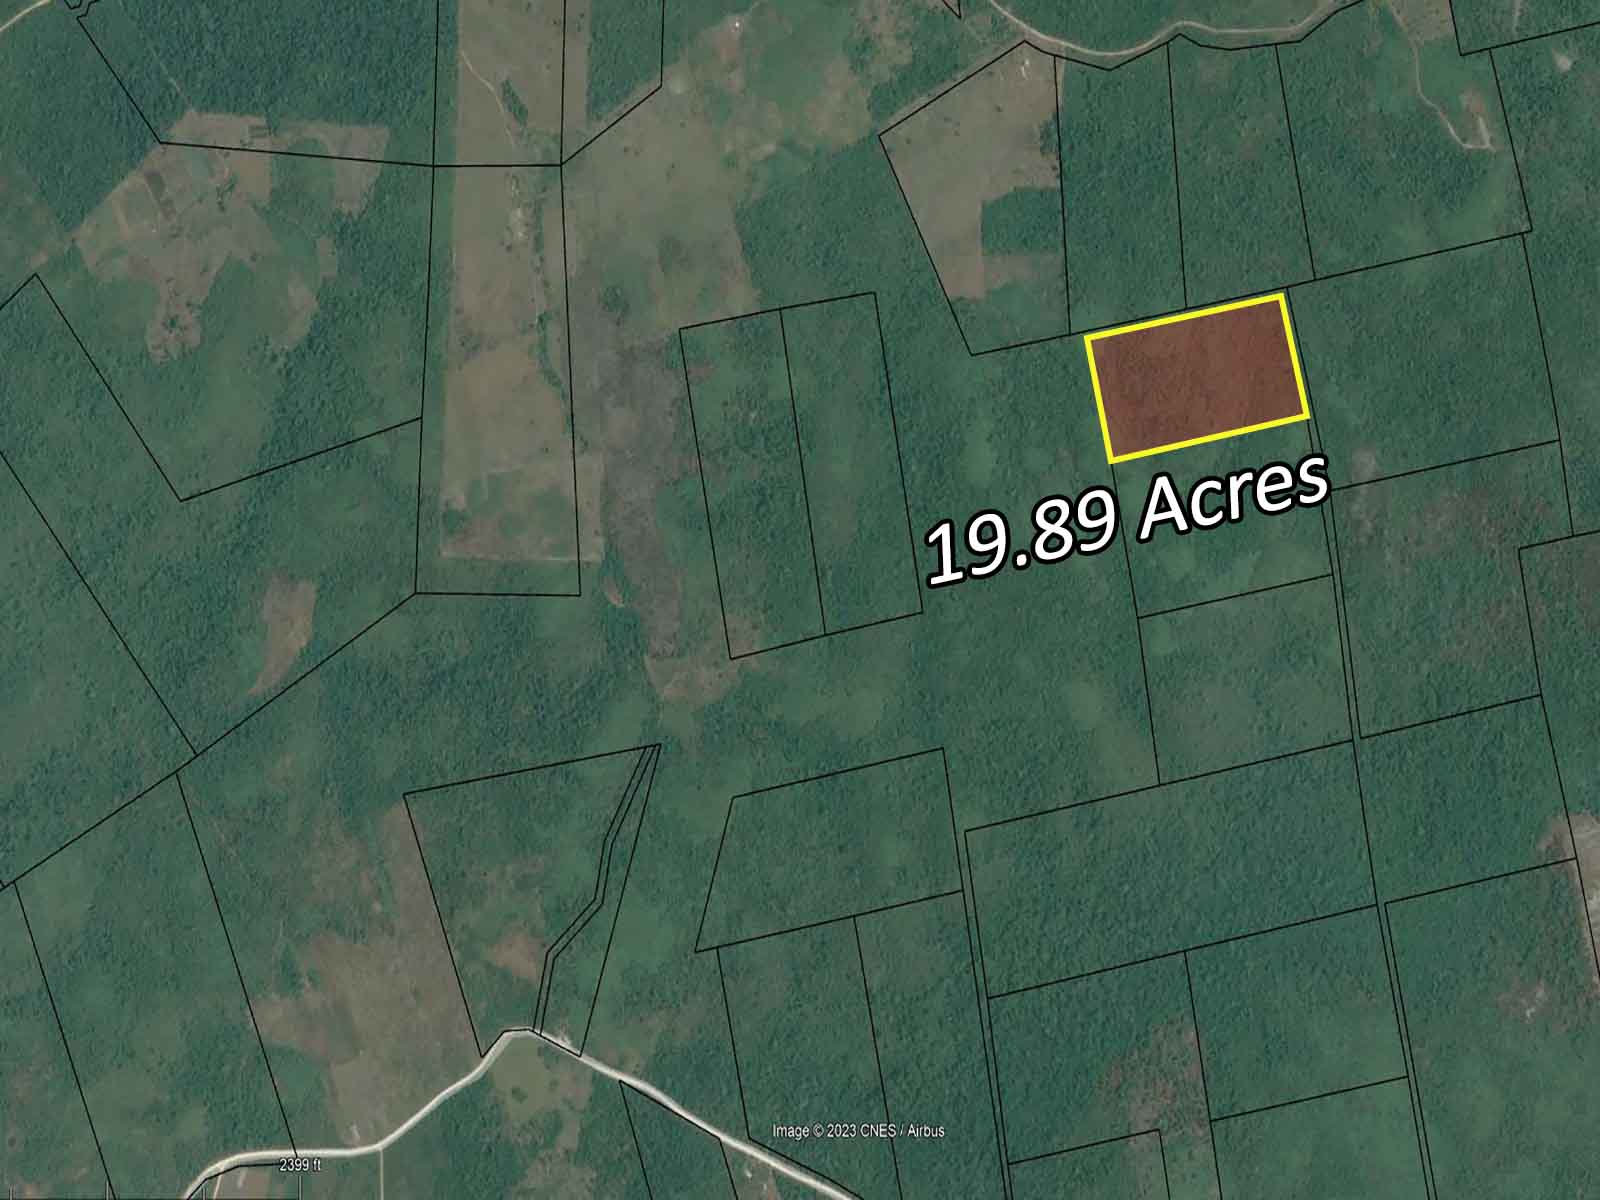 FOR-SALE: 19.89 Acres in Young Gal/Mcrae Cayo District, Belize.